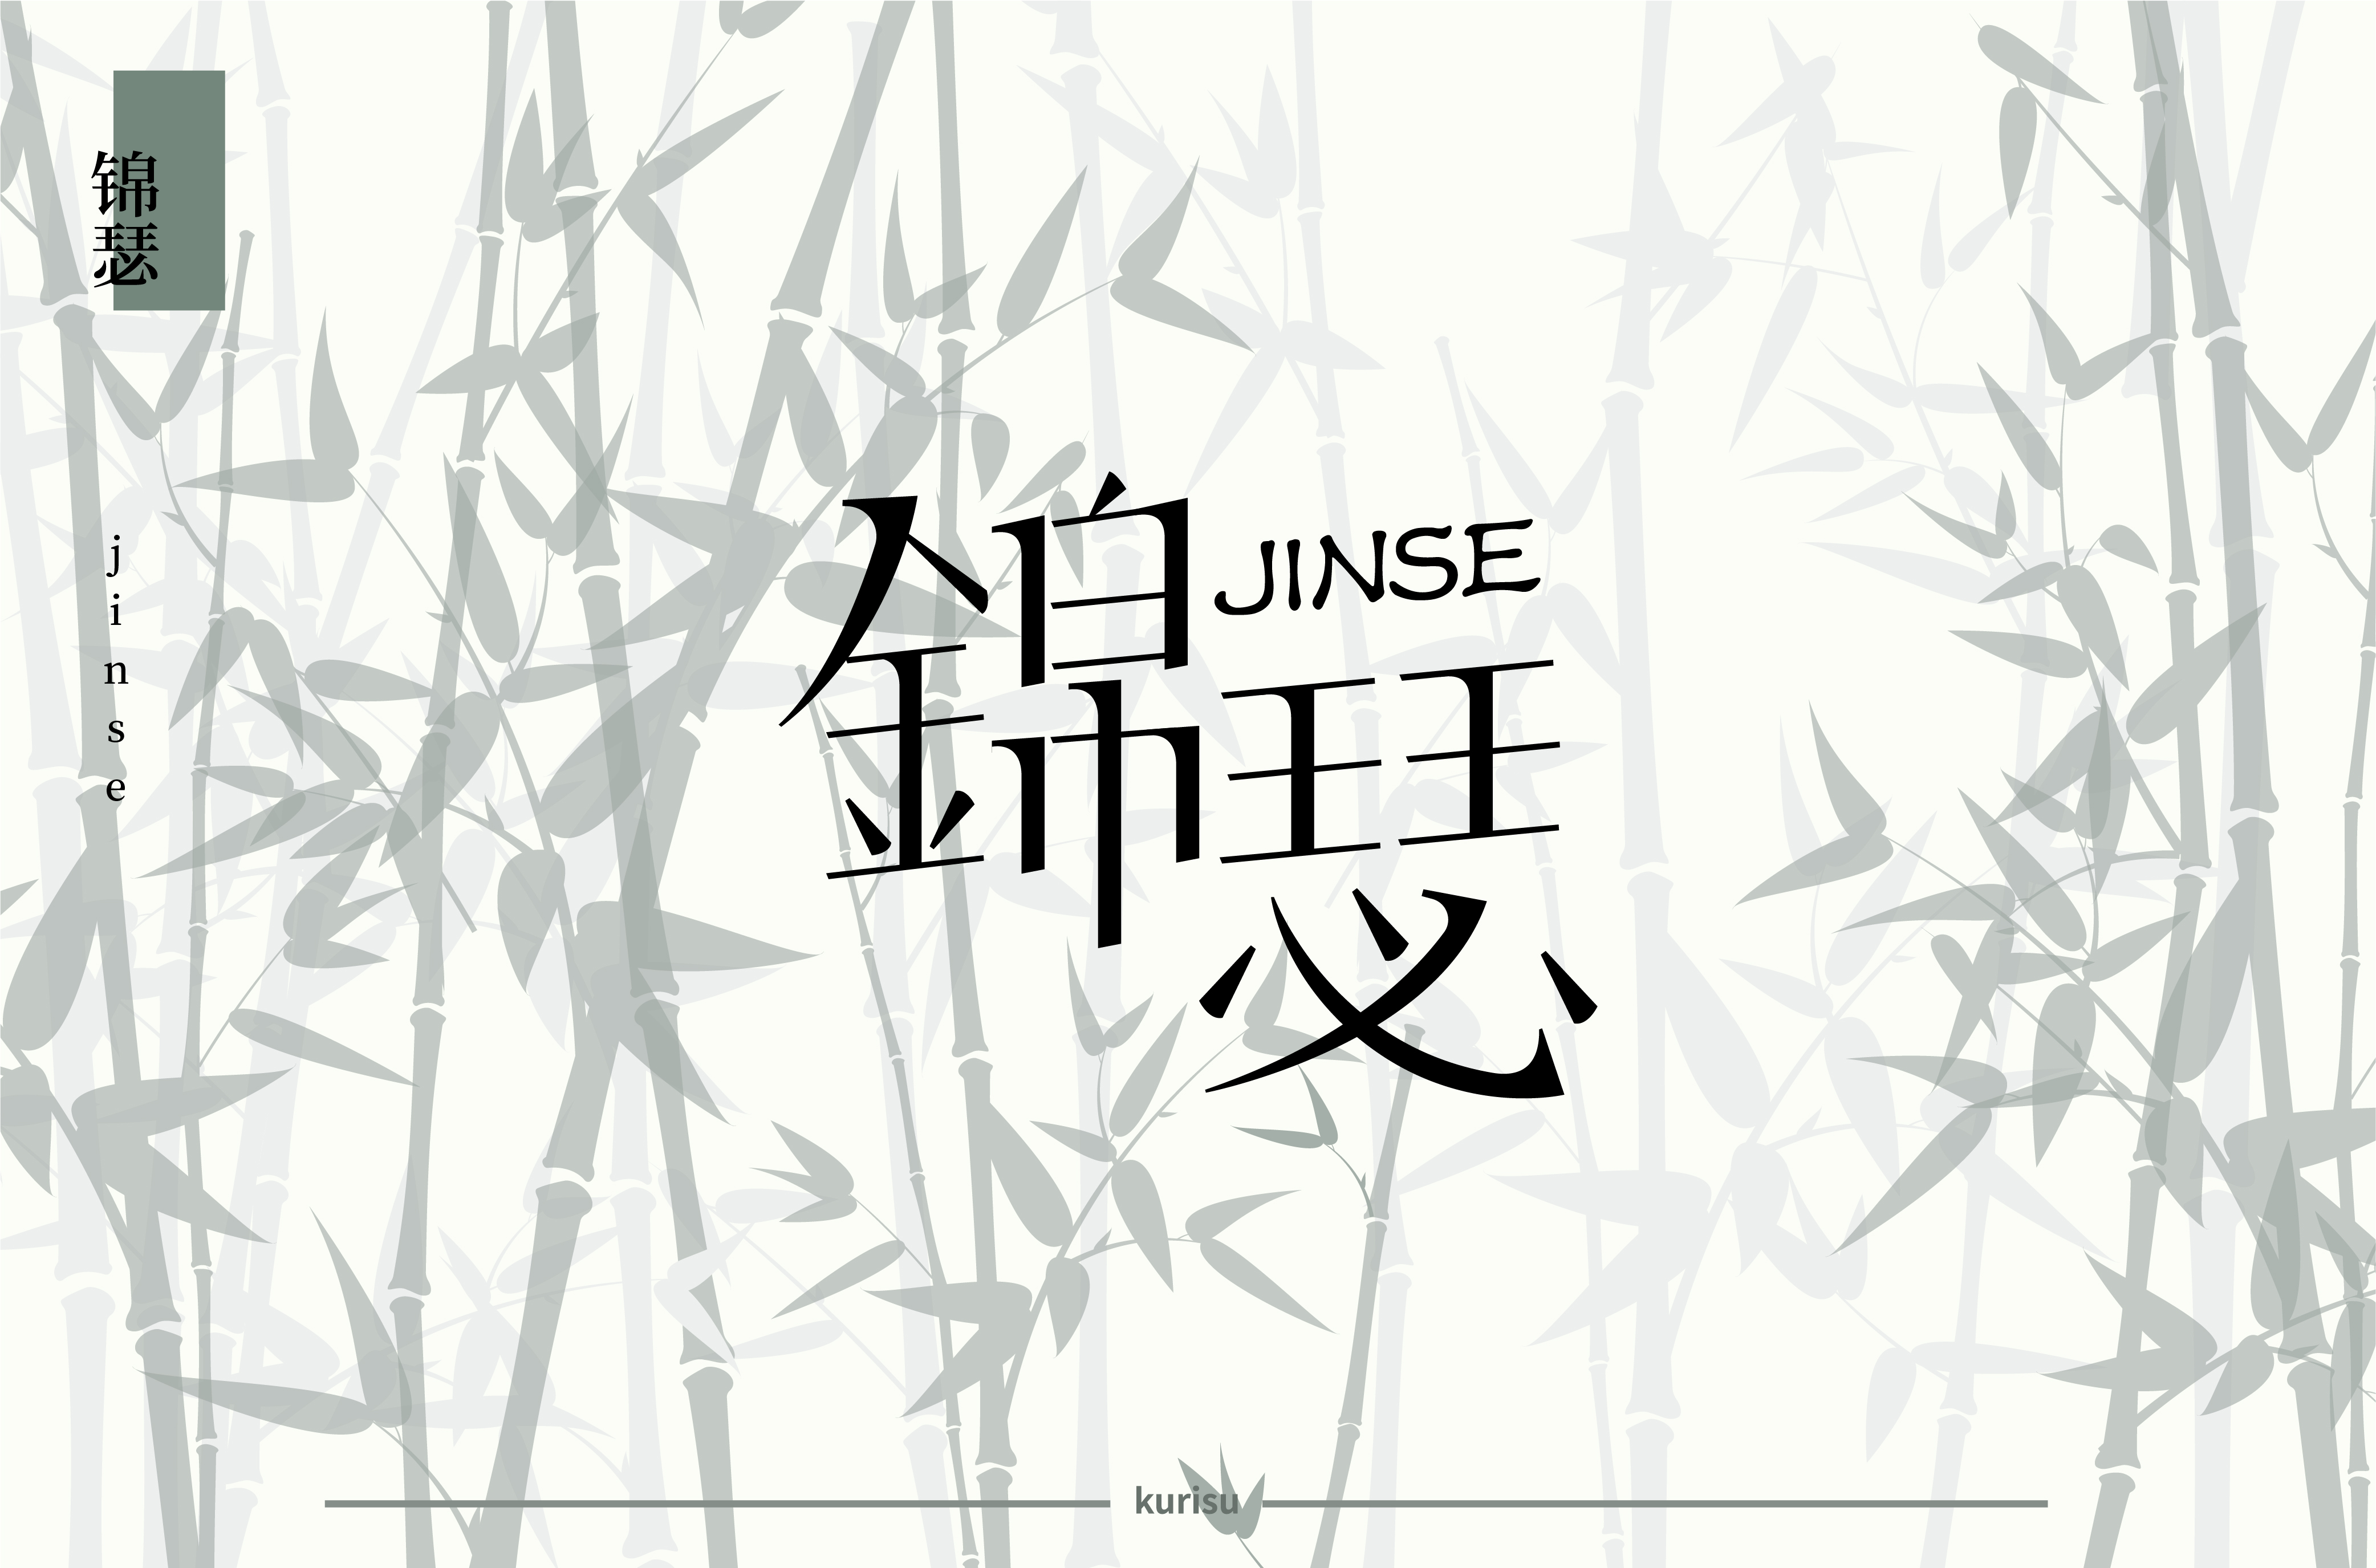 Creative font design with different styles and backgrounds with Jinse as the theme